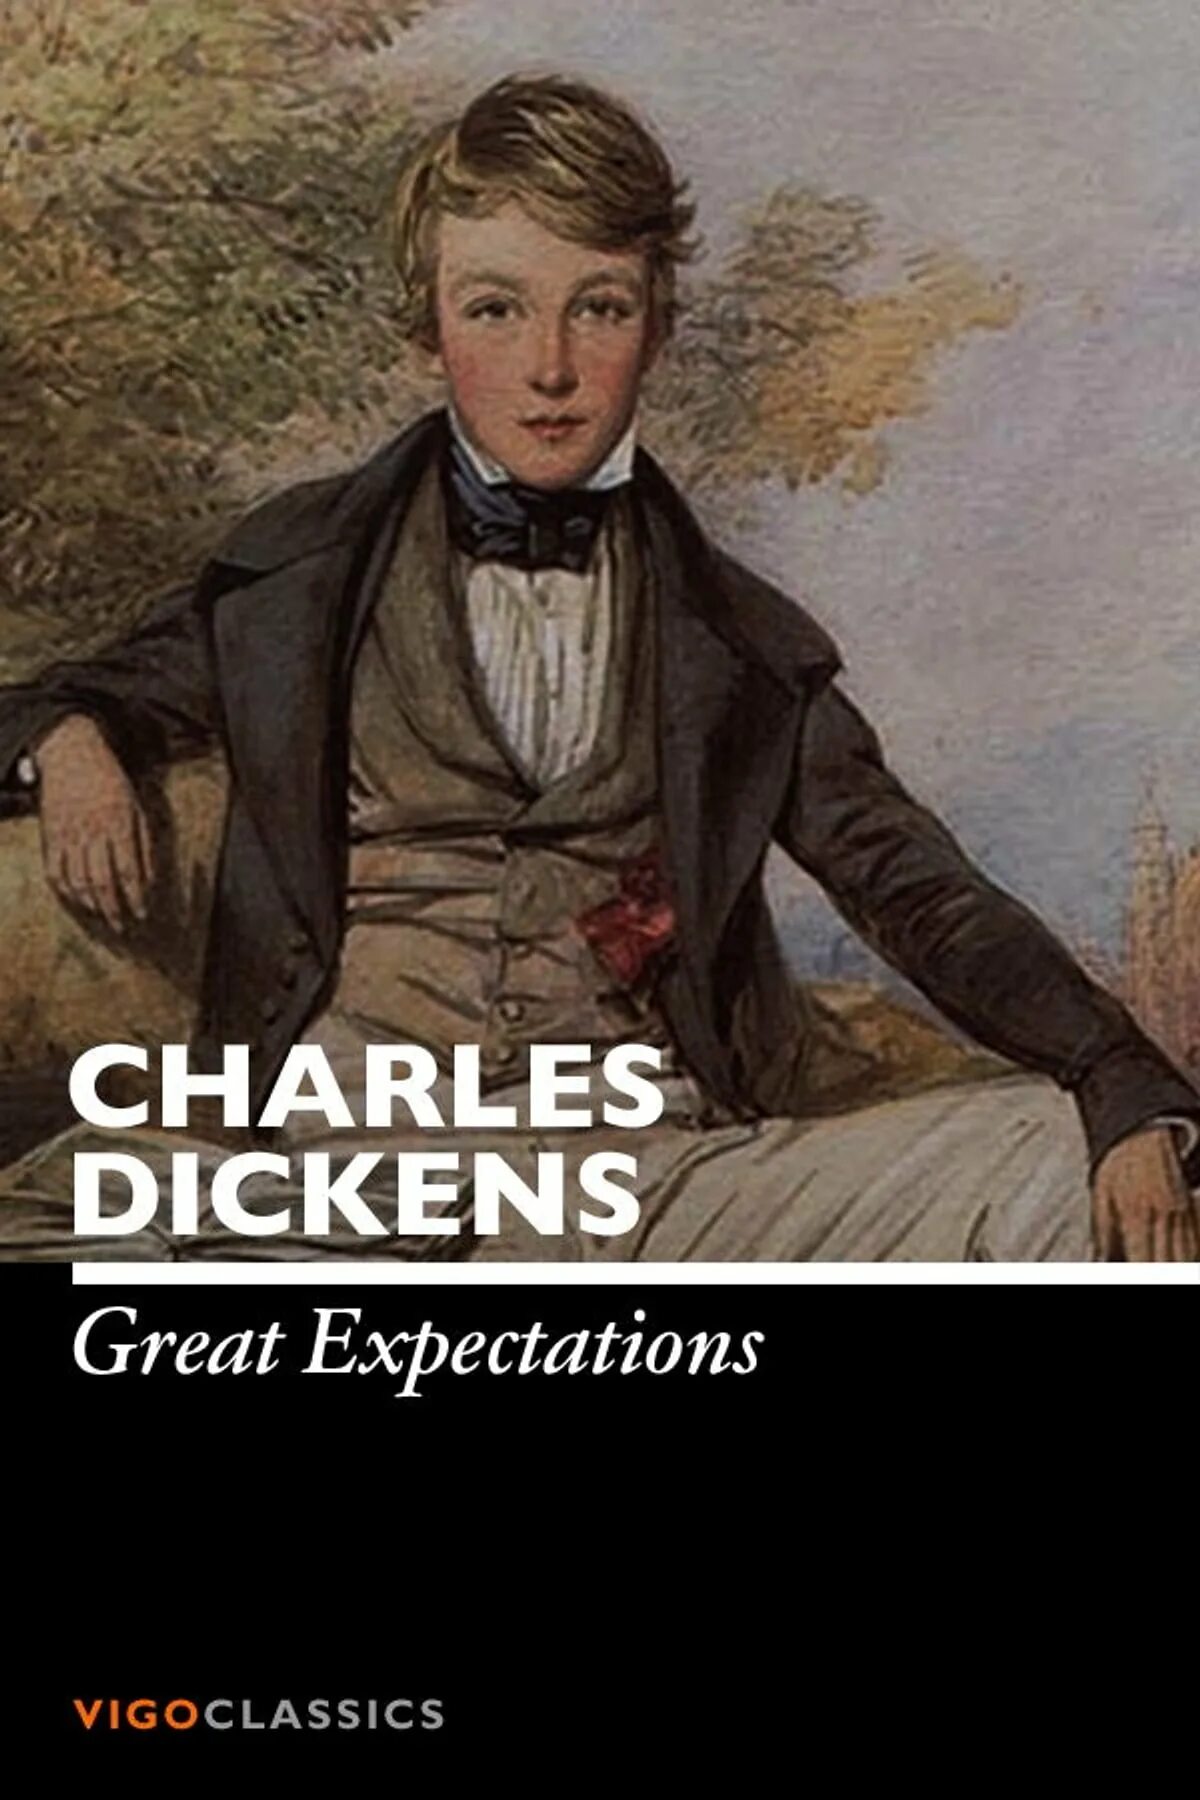 “Great expectations ” by Charles Dickens Cover. Great expectations книга.